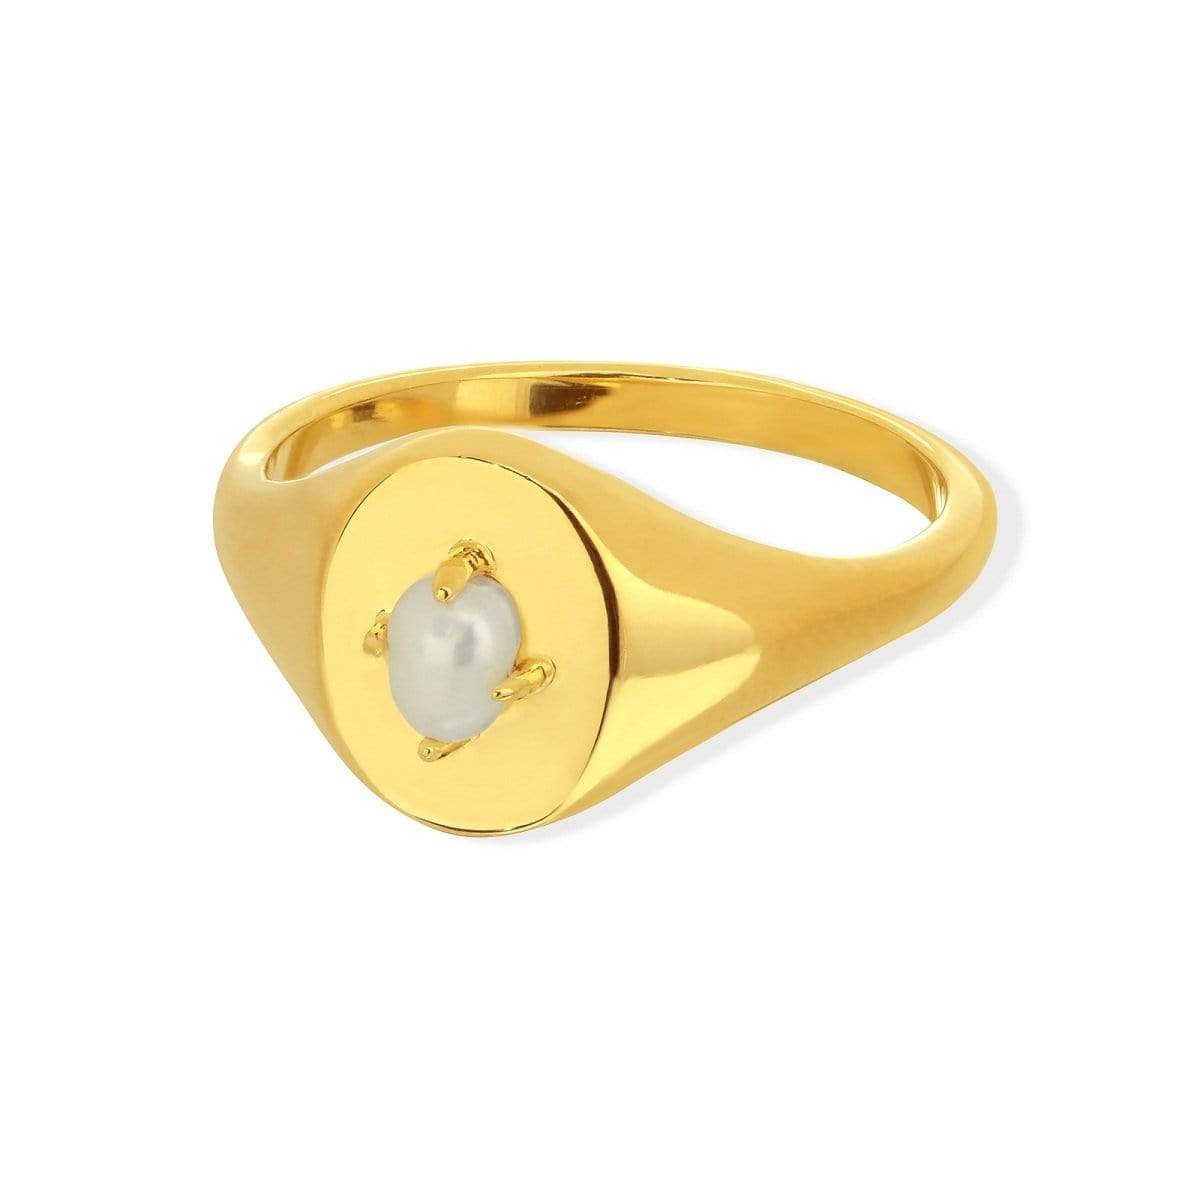 Boma Jewelry Rings 14K Gold Plated / 7 Parel Signet Ring